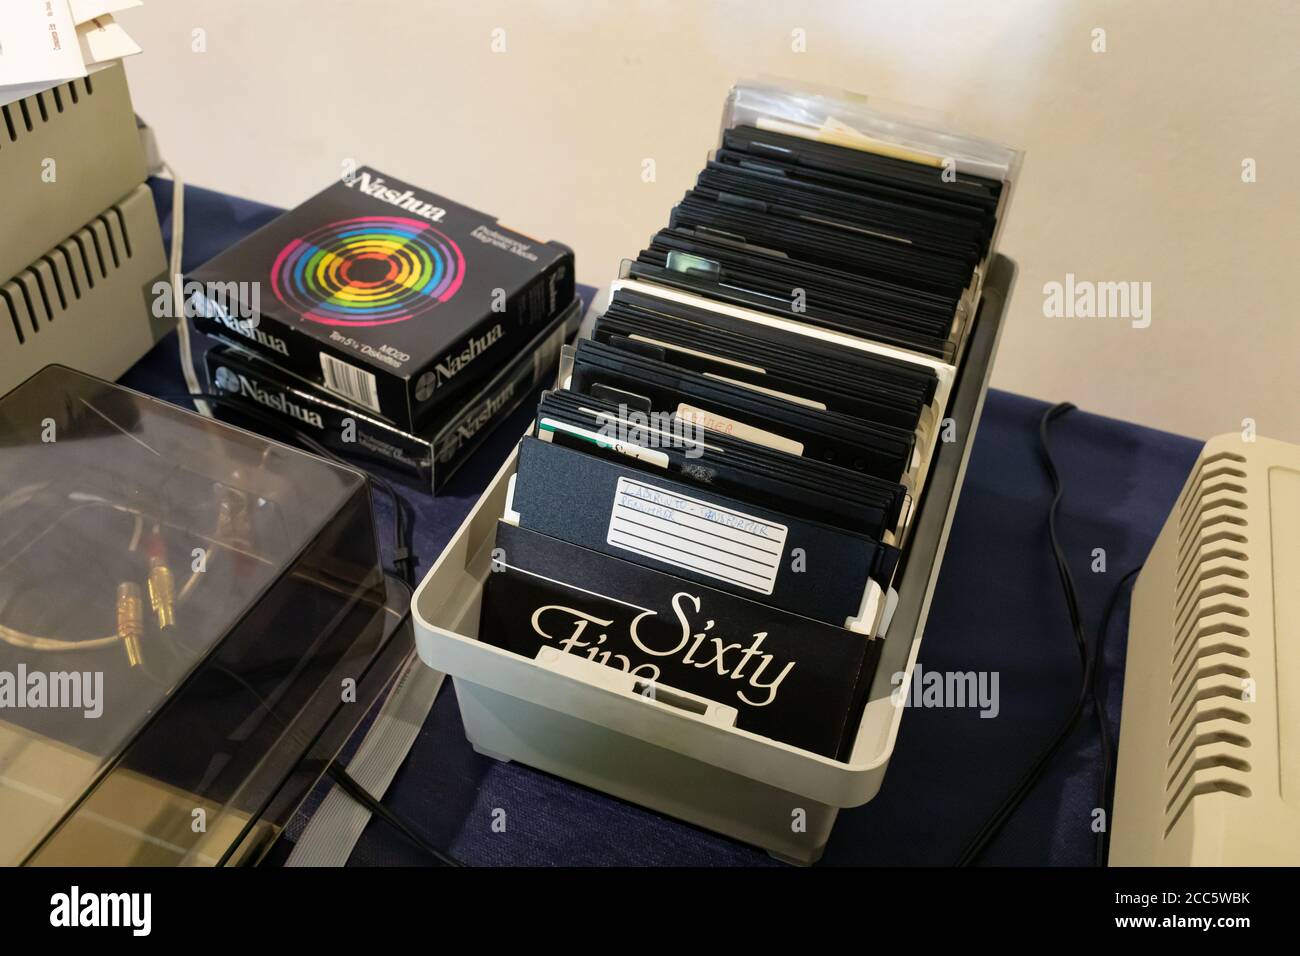 ROME, ITALY - APRIL 27, 2019: Boxes with 5.25 floppy disks produced by Office Data Products and Nashua exhibited at the Vintage Computer Festival Ital Stock Photo